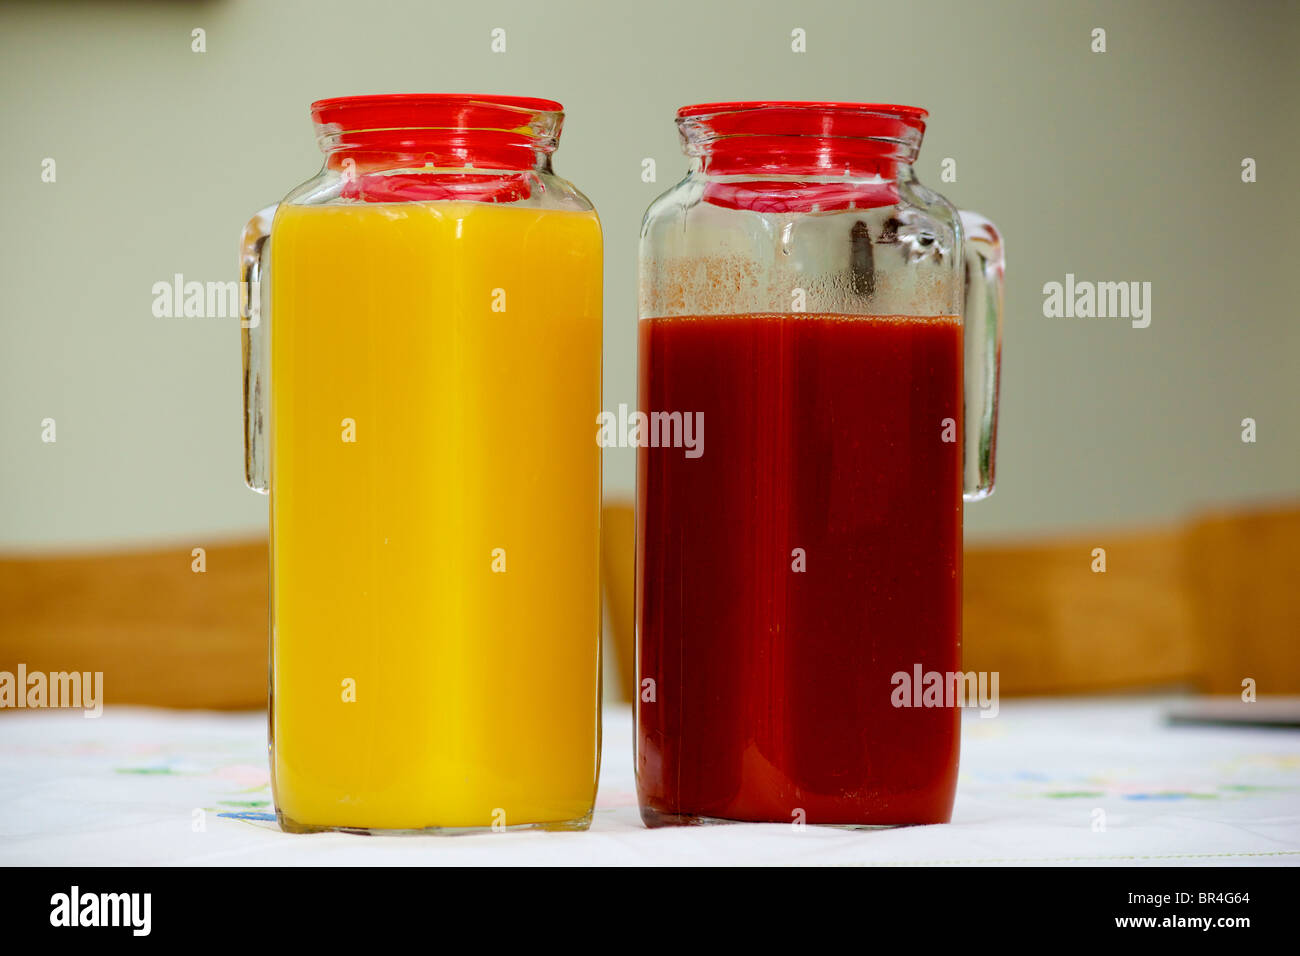 https://c8.alamy.com/comp/BR4G64/two-glass-jugs-full-of-fruit-juice-orange-and-tomato-BR4G64.jpg